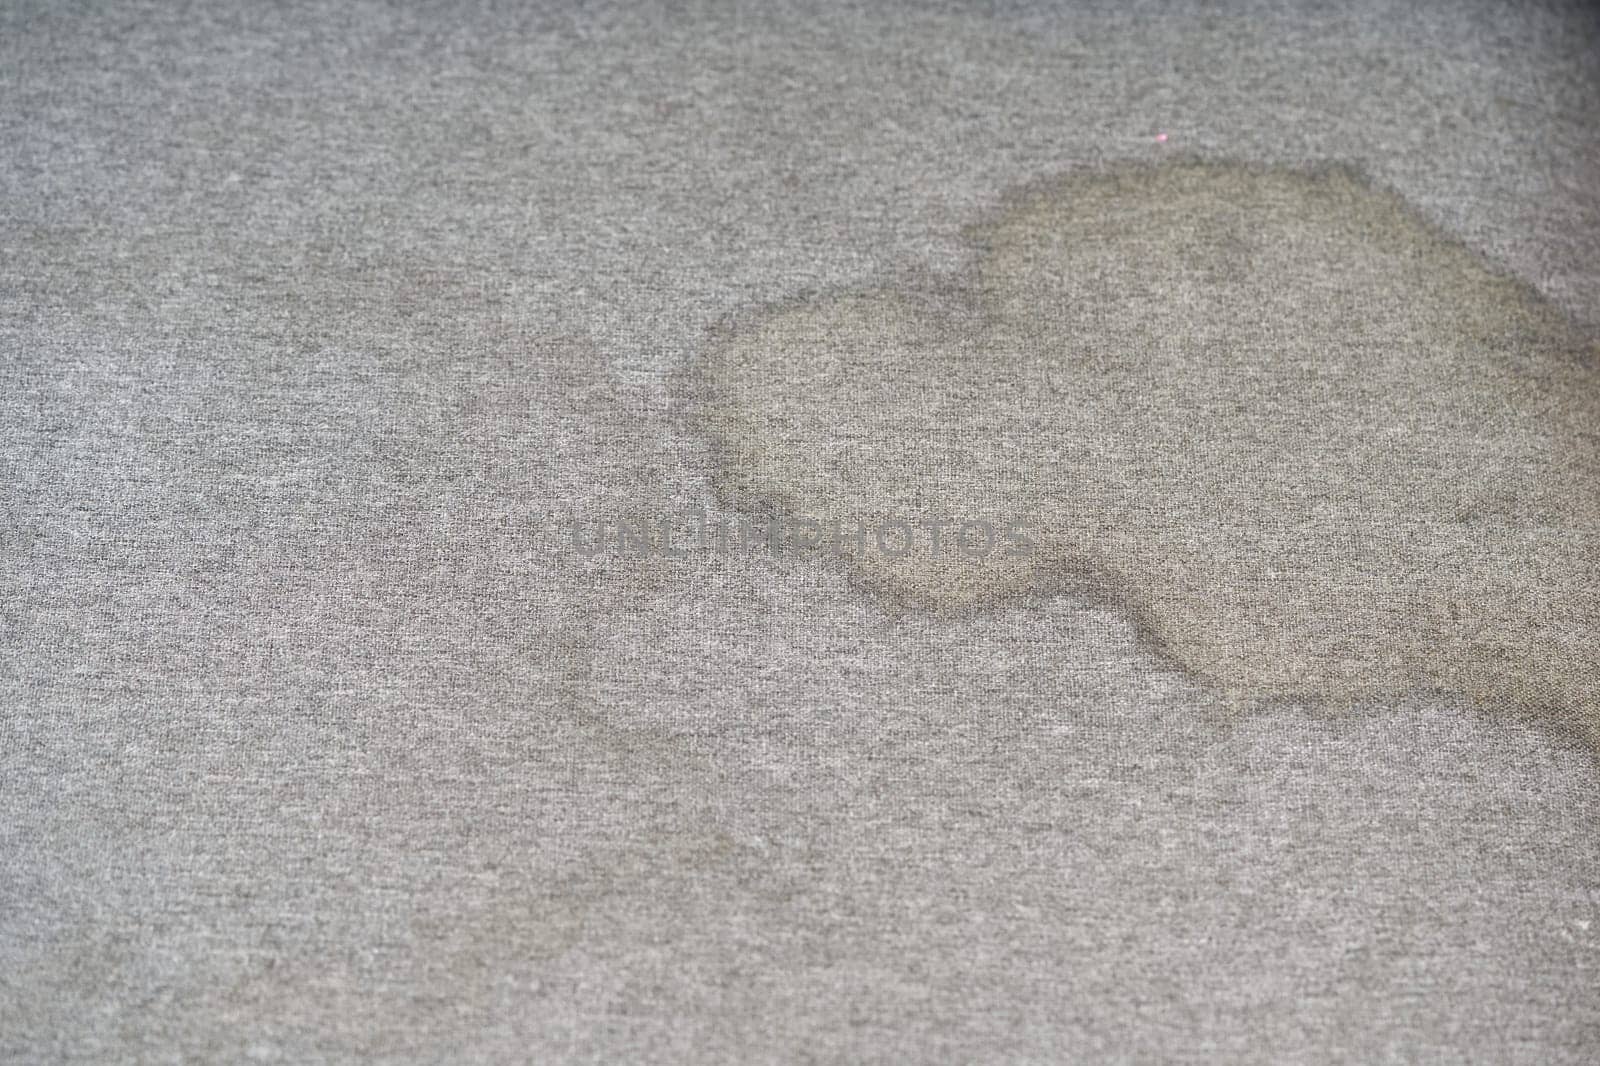 Dirty, stain, blot , fleck of water on the fabric, textile sofa. Dirty textile sofa chemical cleaning Dirty textile sofa chemical cleaning. upholstered furniture cleaning concept